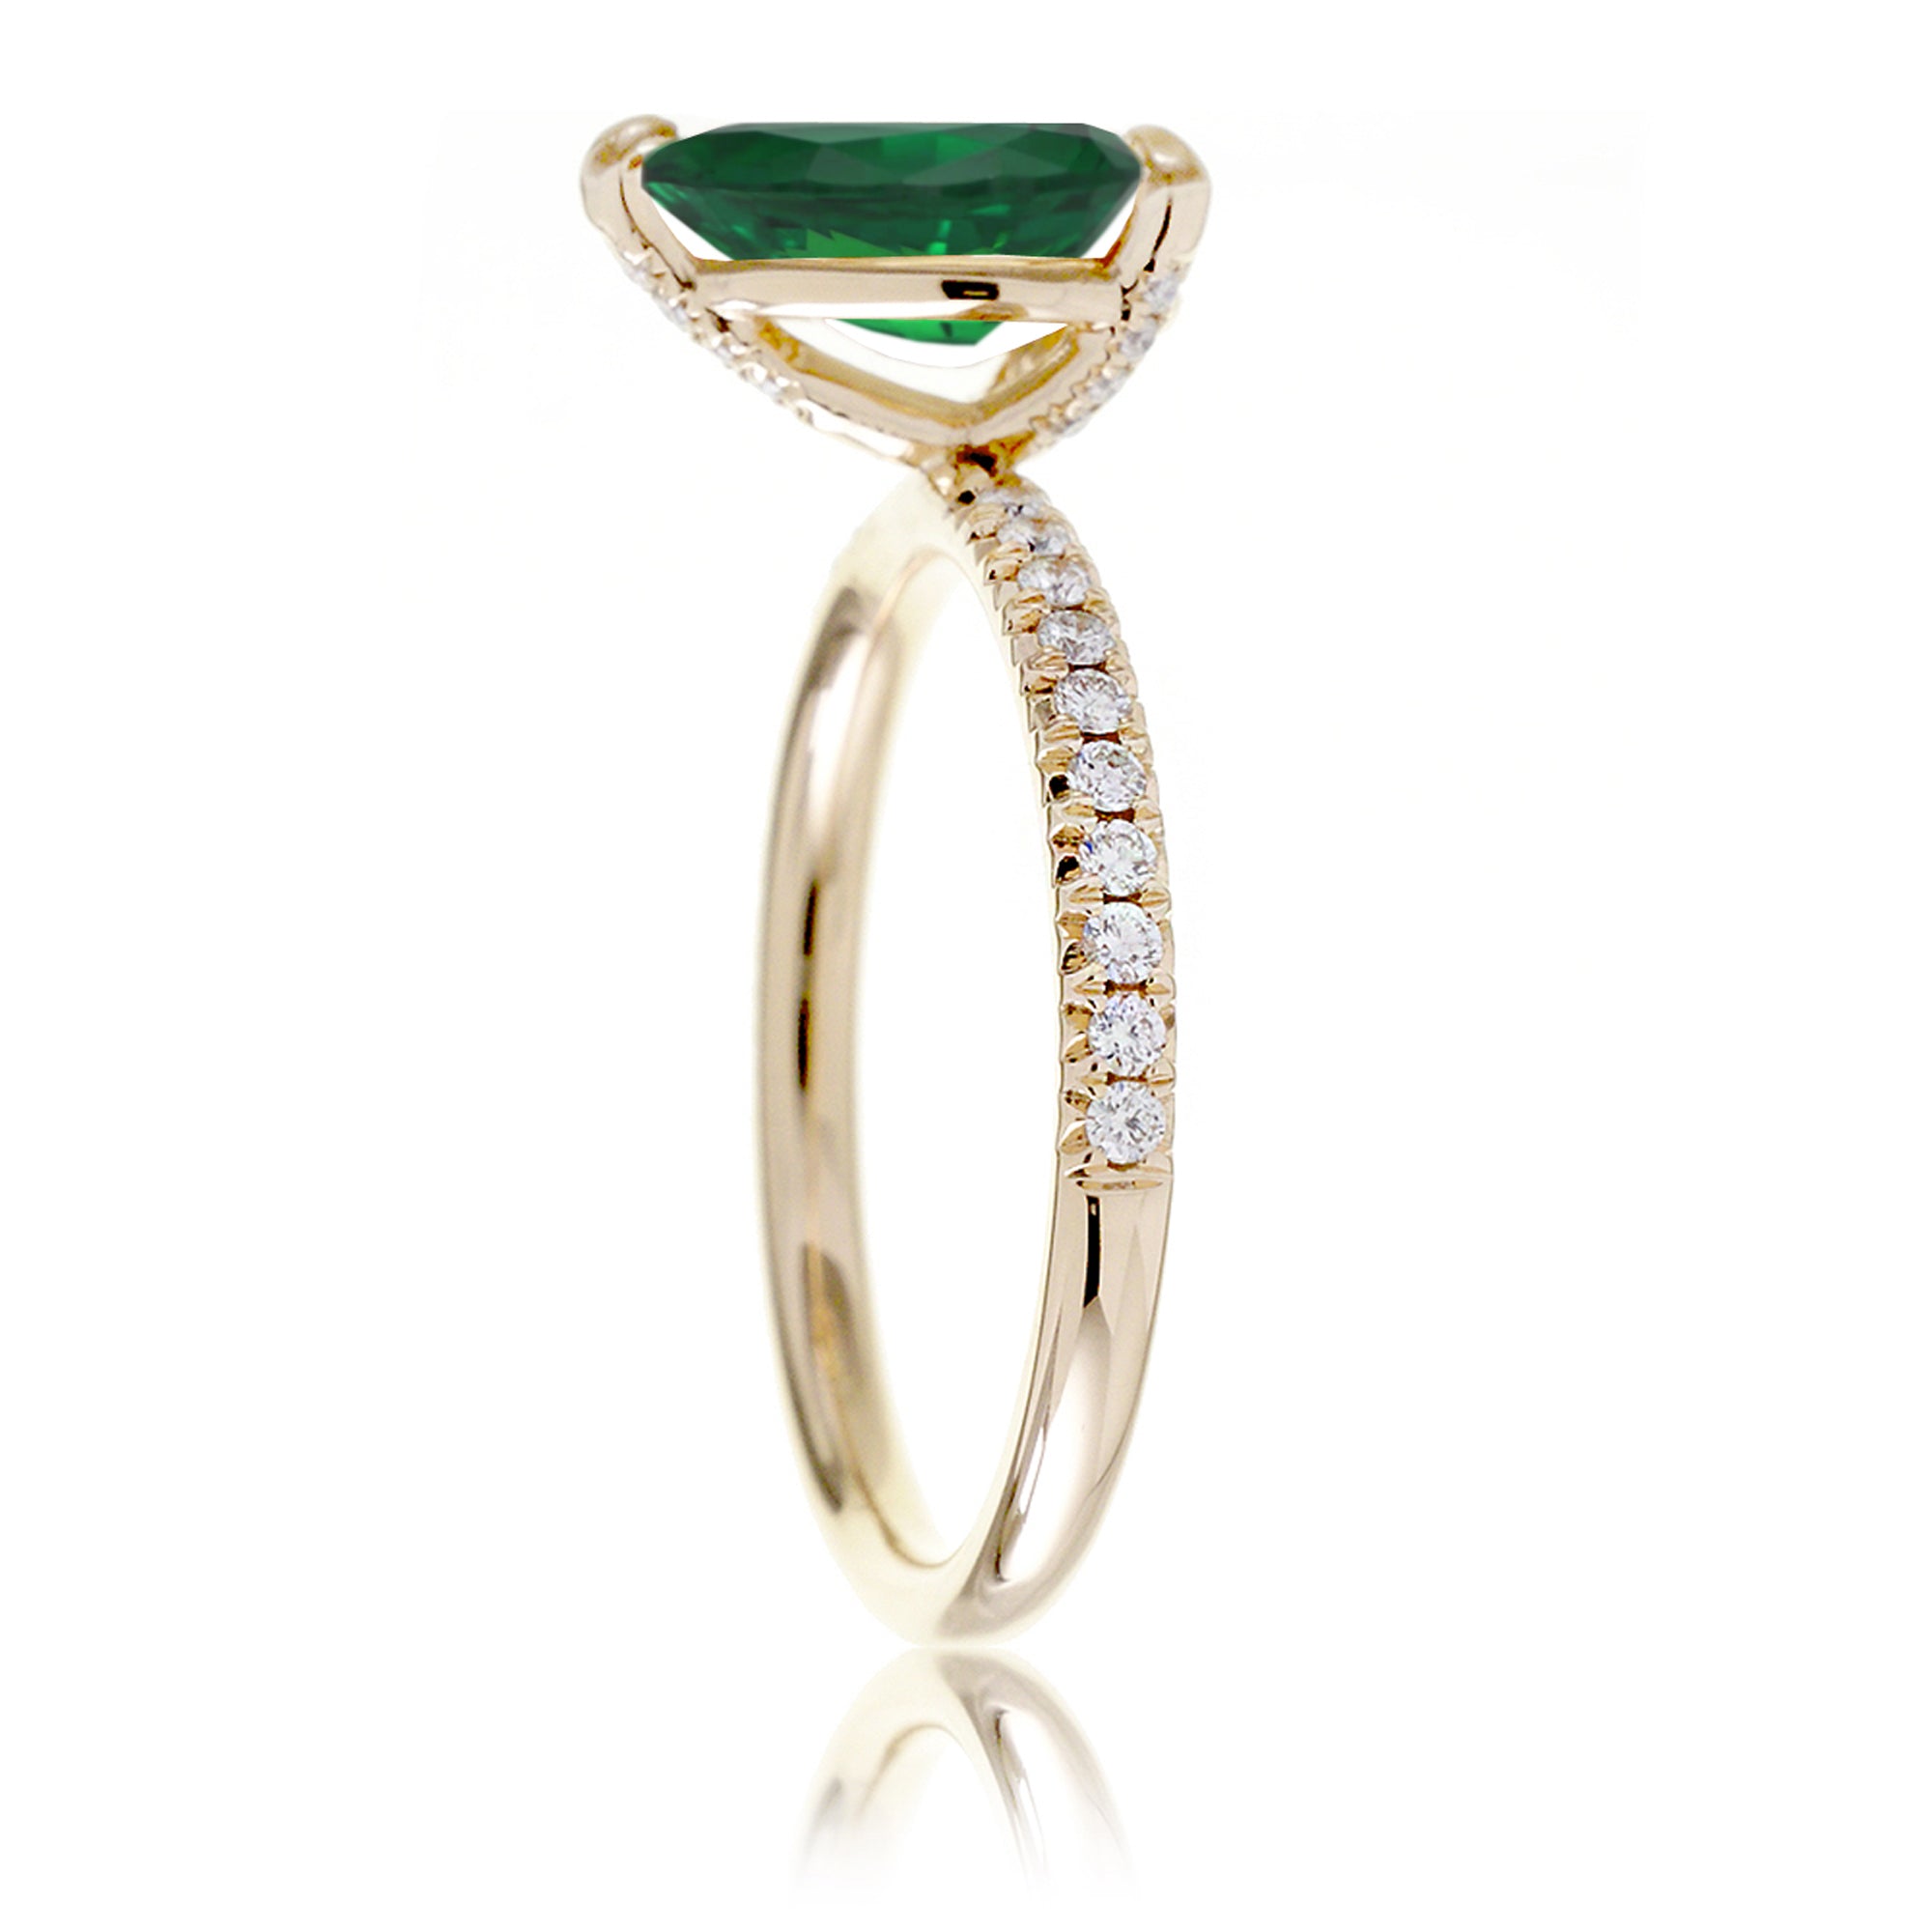 Pear green emerald diamond band engagement ring yellow gold - the Ava